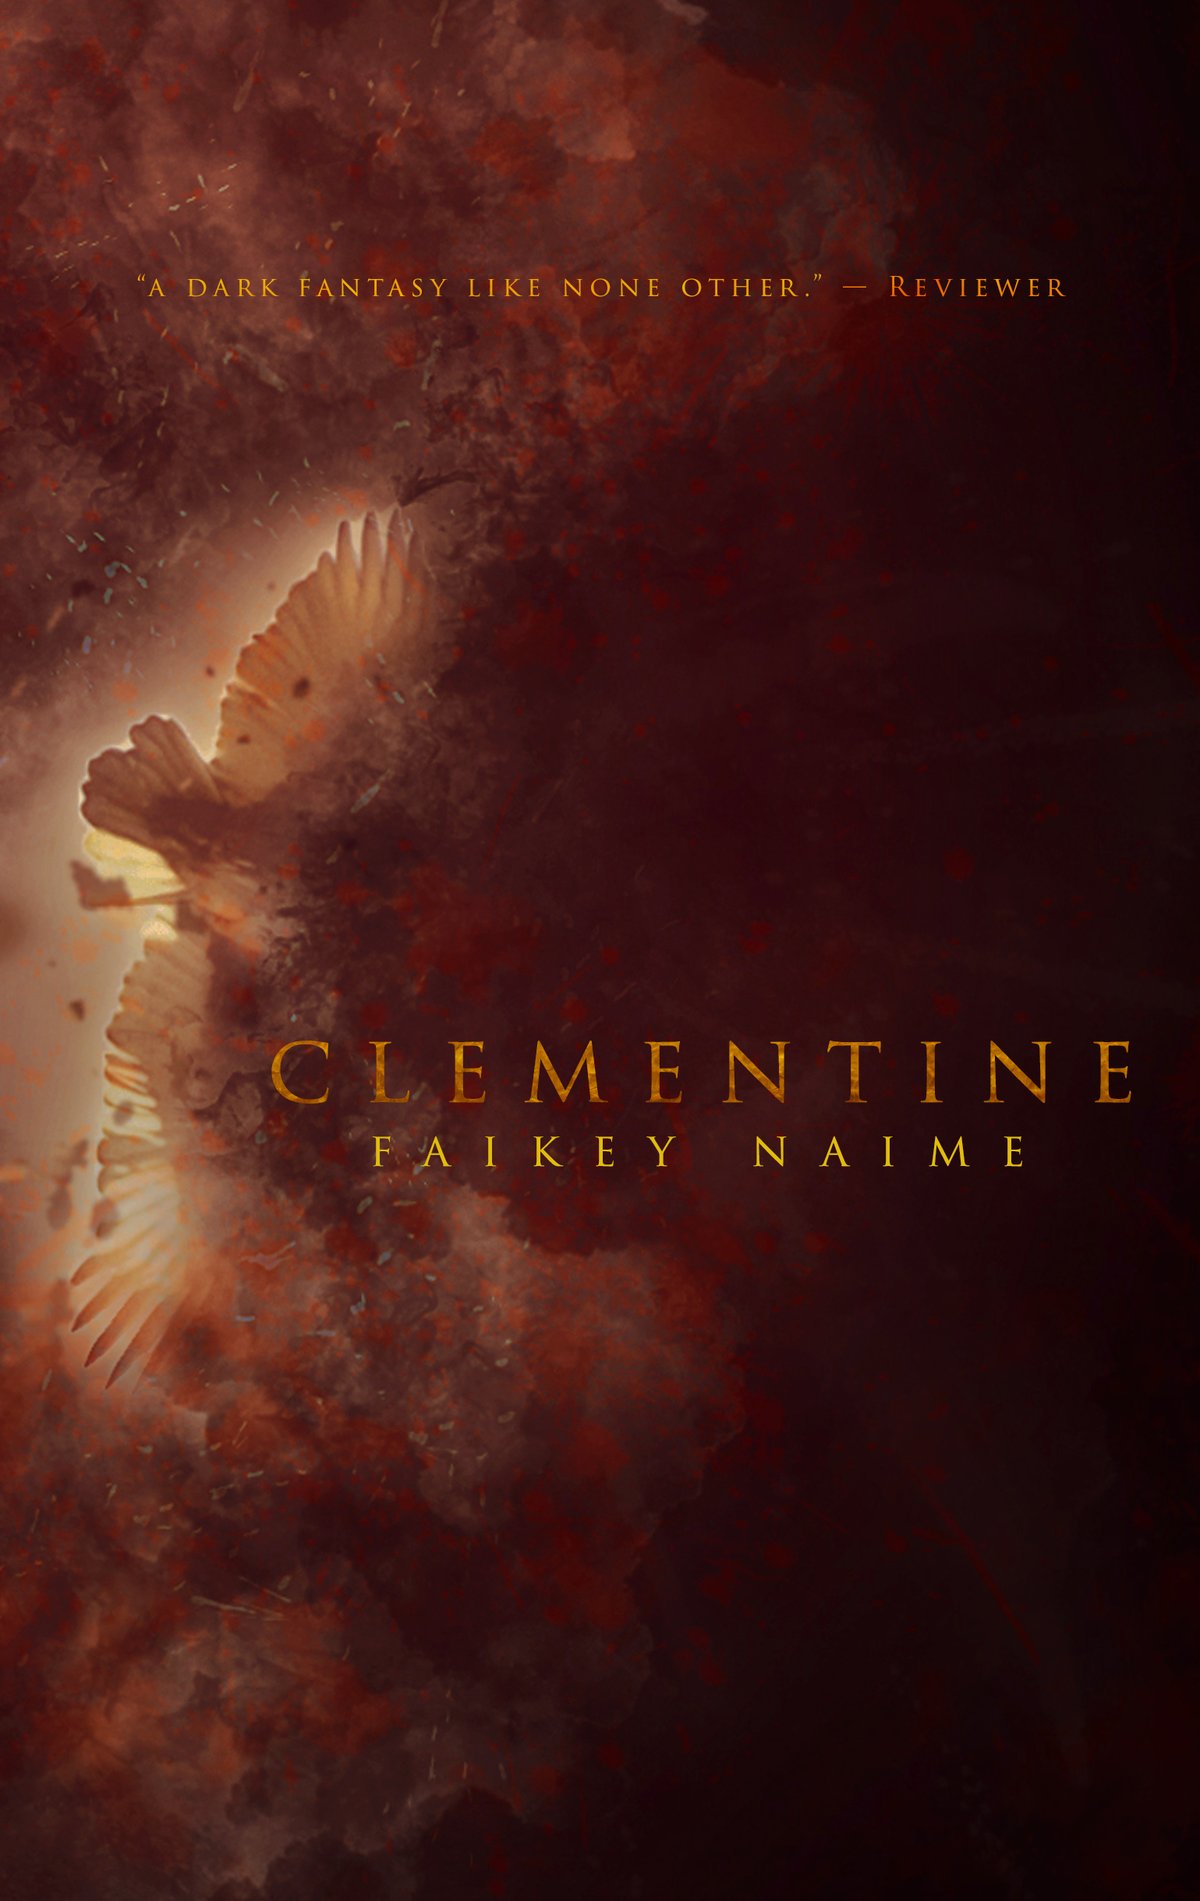 Image of "Clementine"